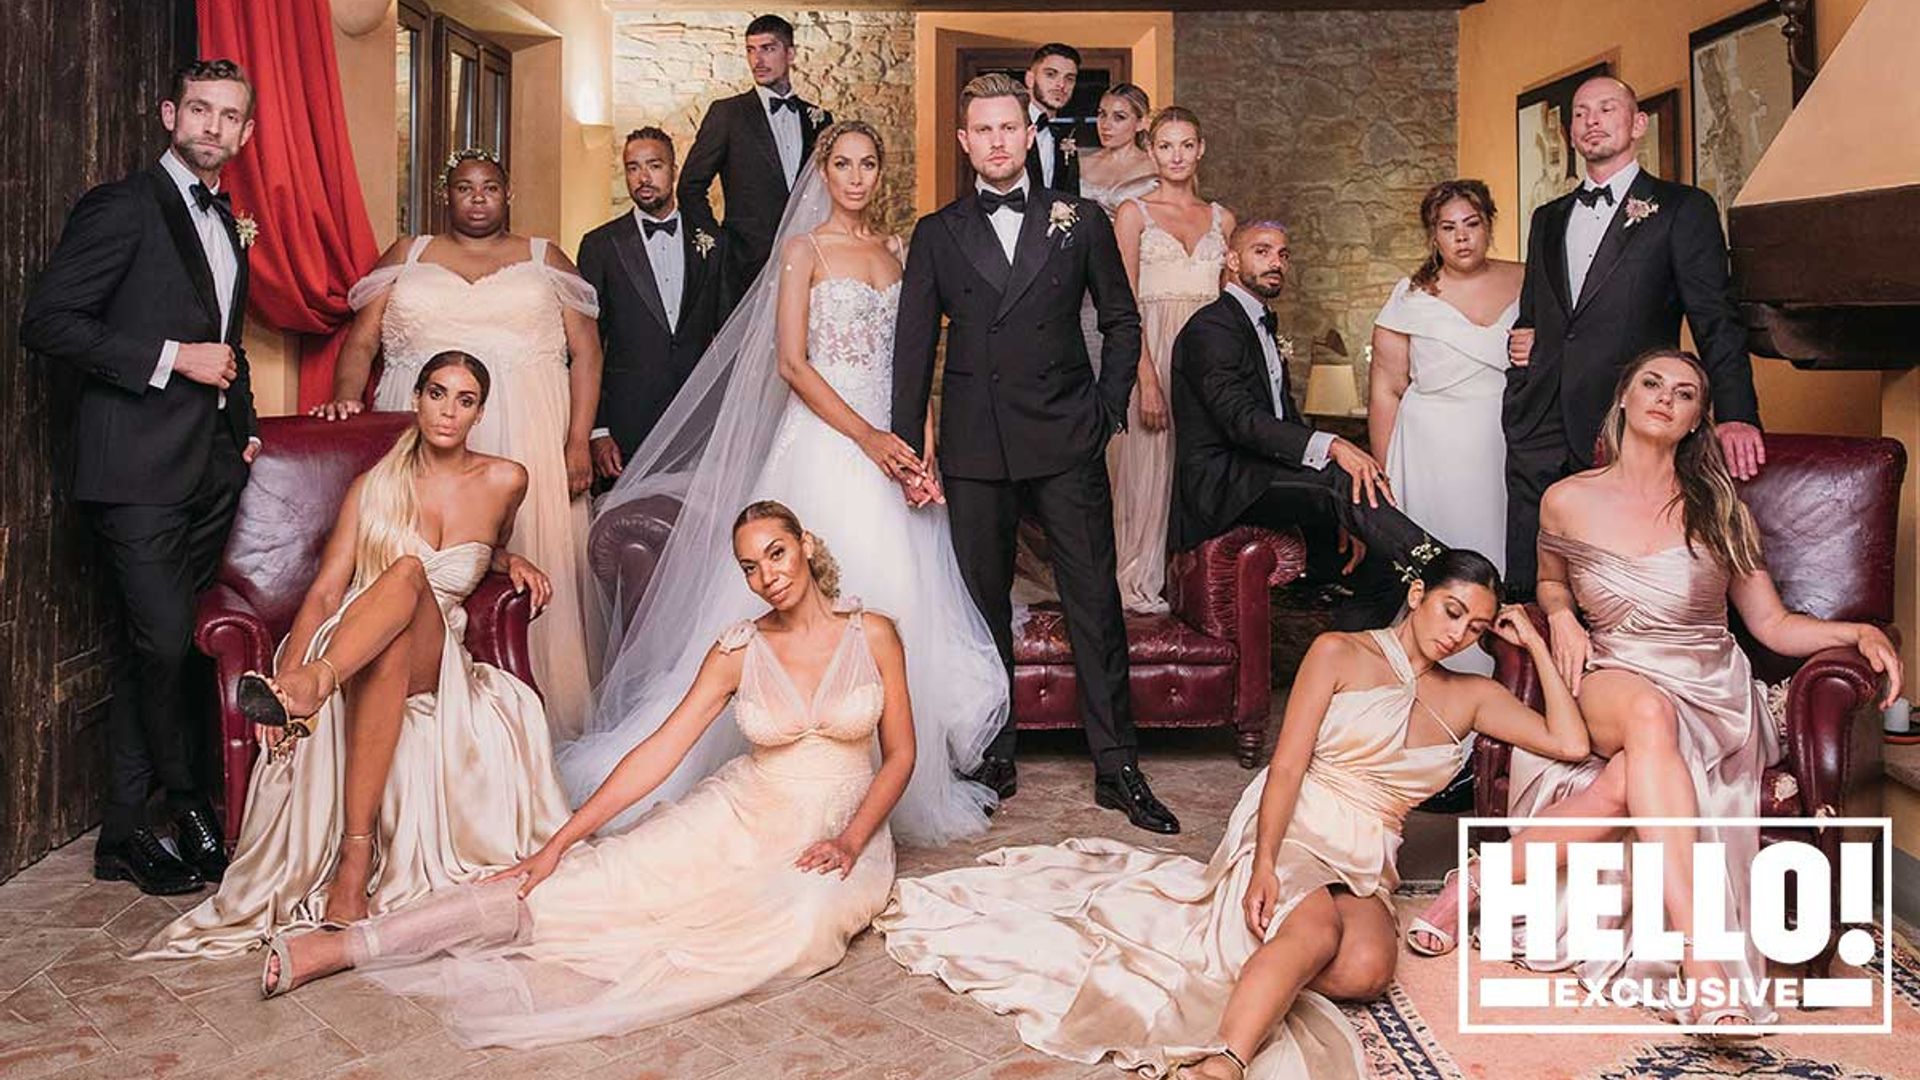 Leona Lewis and Dennis Jauch's incredible wedding: a look back